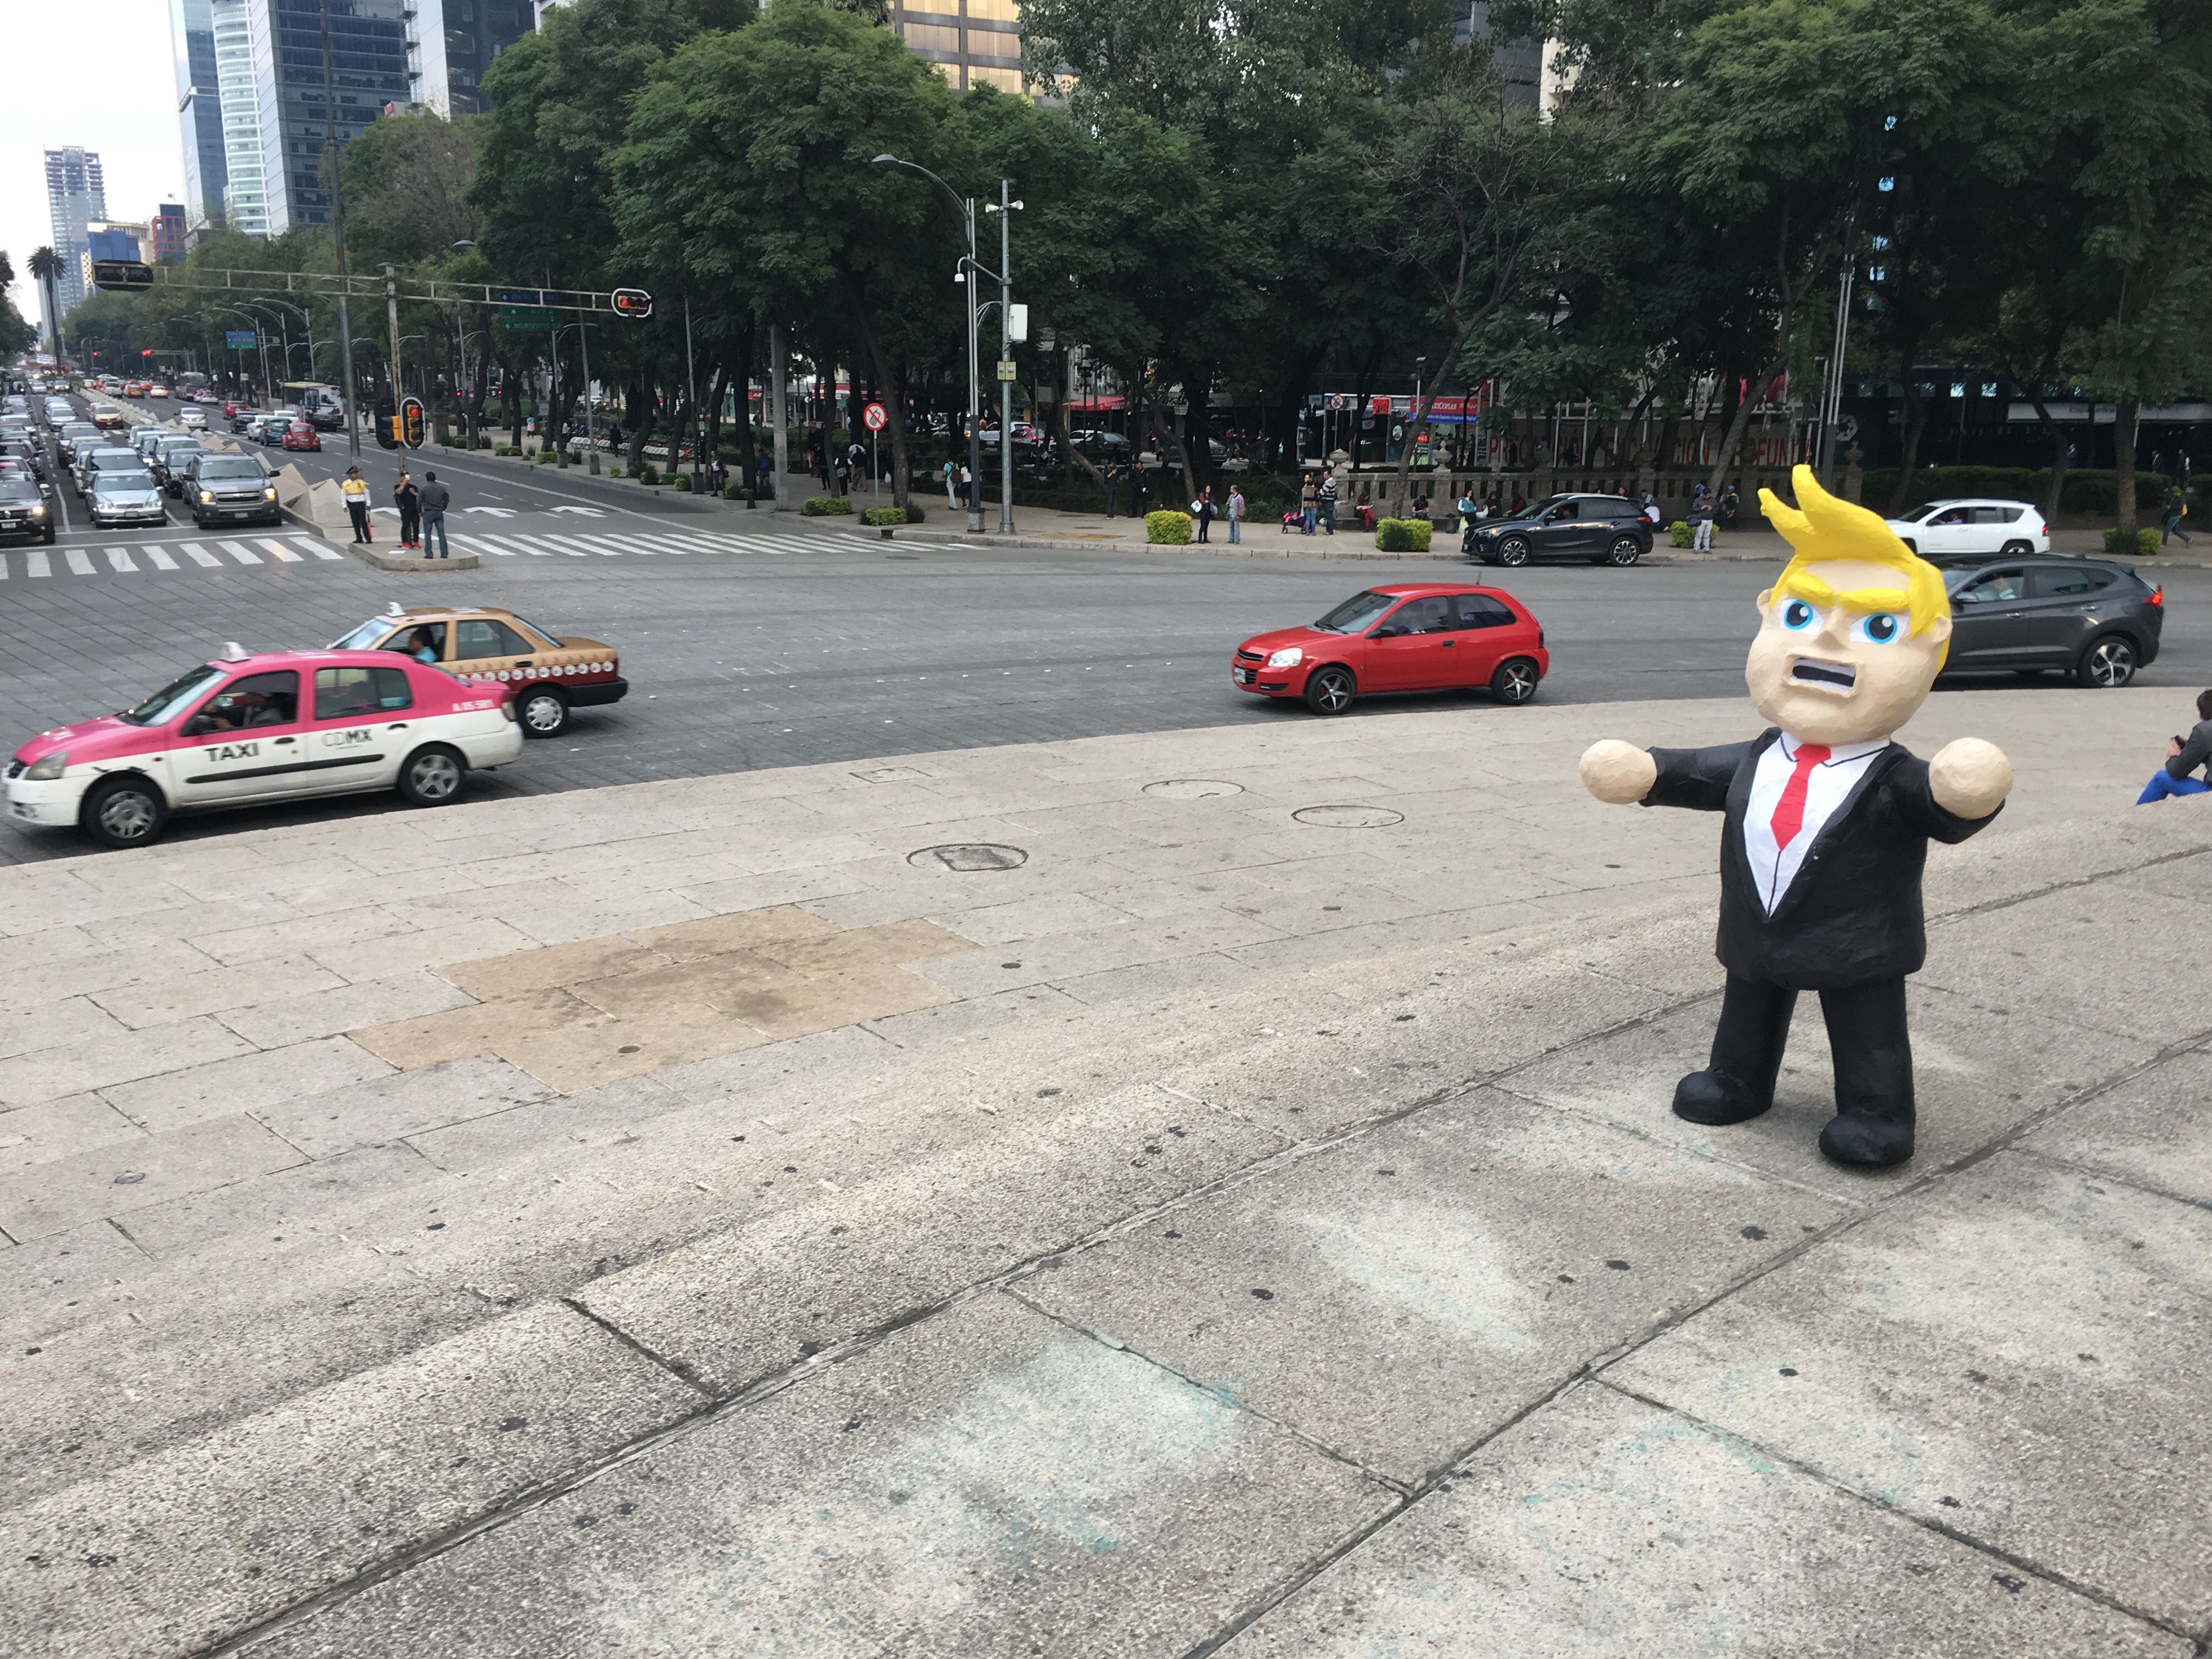 A Donald Trump piñata in the center of Mexico City. Many Mexicans are deeply fearful of Trump's enacting his campaign promises to cancel or alter NAFTA, restrict remittances sent to Mexico from the United States, deport millions of undocumented immigrants living in the U.S., and build a wall along the U.S.-Mexico border. Image by Nick Schifrin. Mexico, 2016.